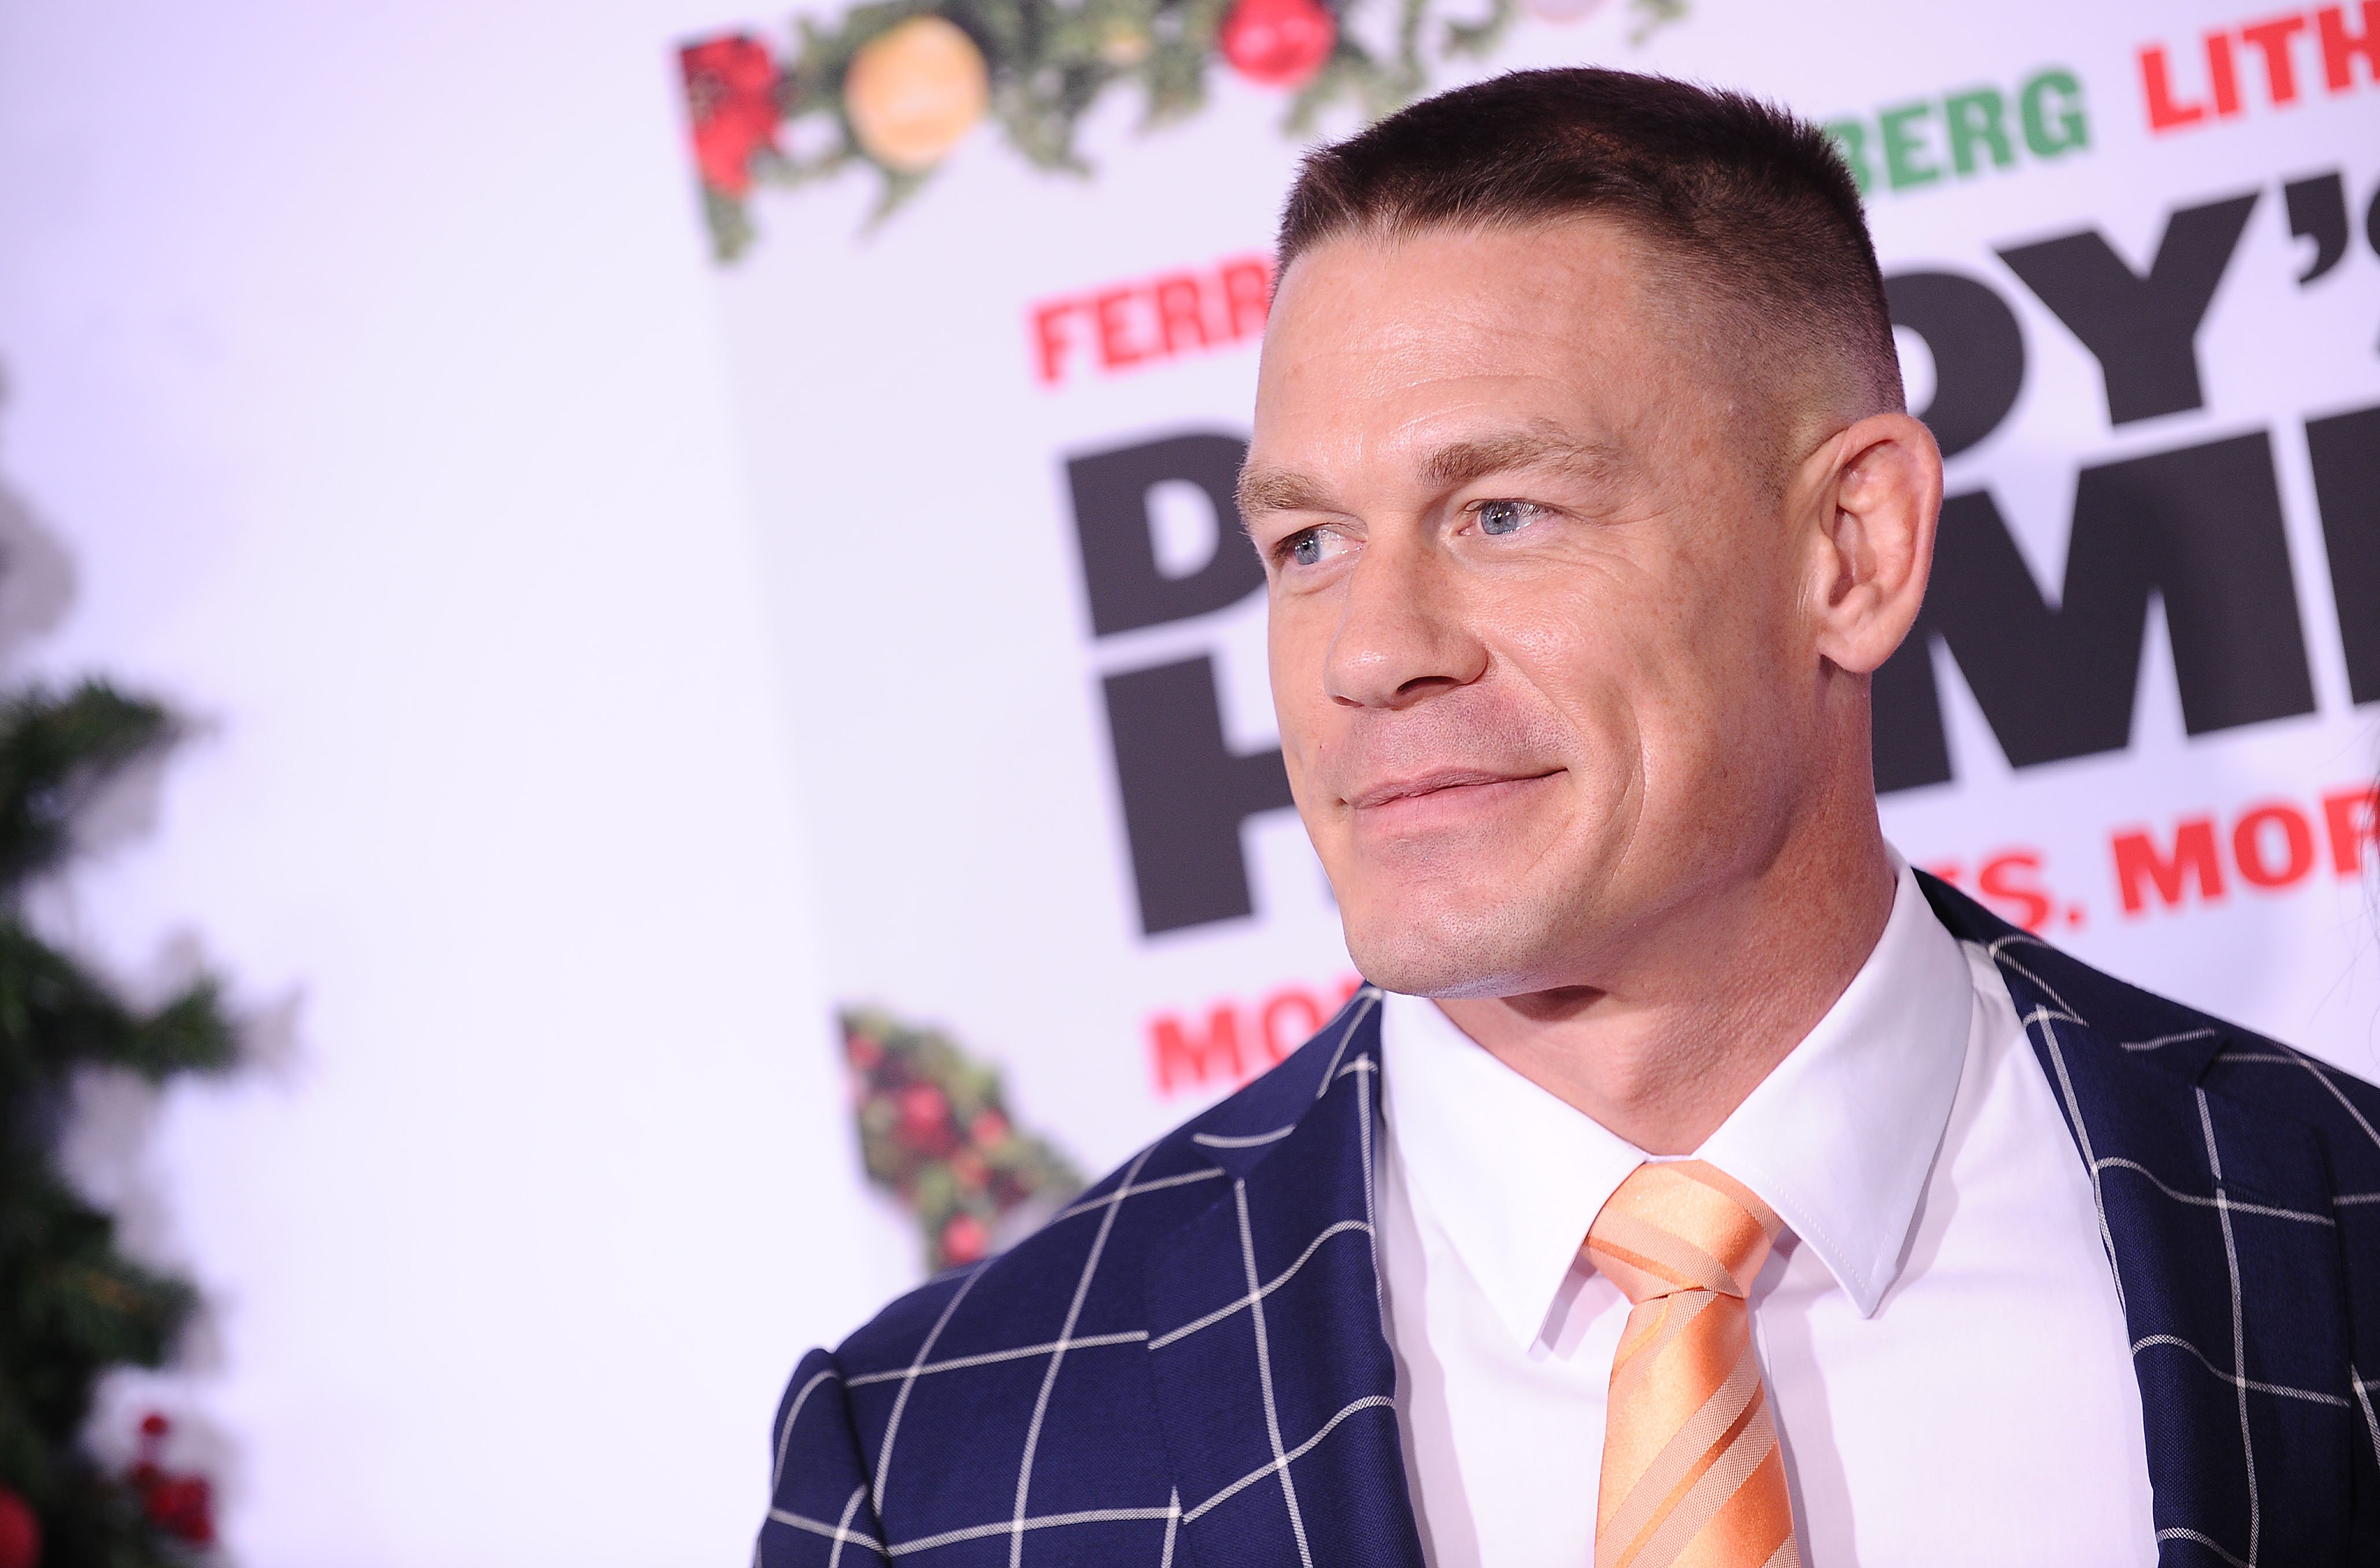 John Cena Reacts To Joining Team Smackdown Live, Enzo Makes Tyler Bate Eat Defeat On 205 Live (Video)